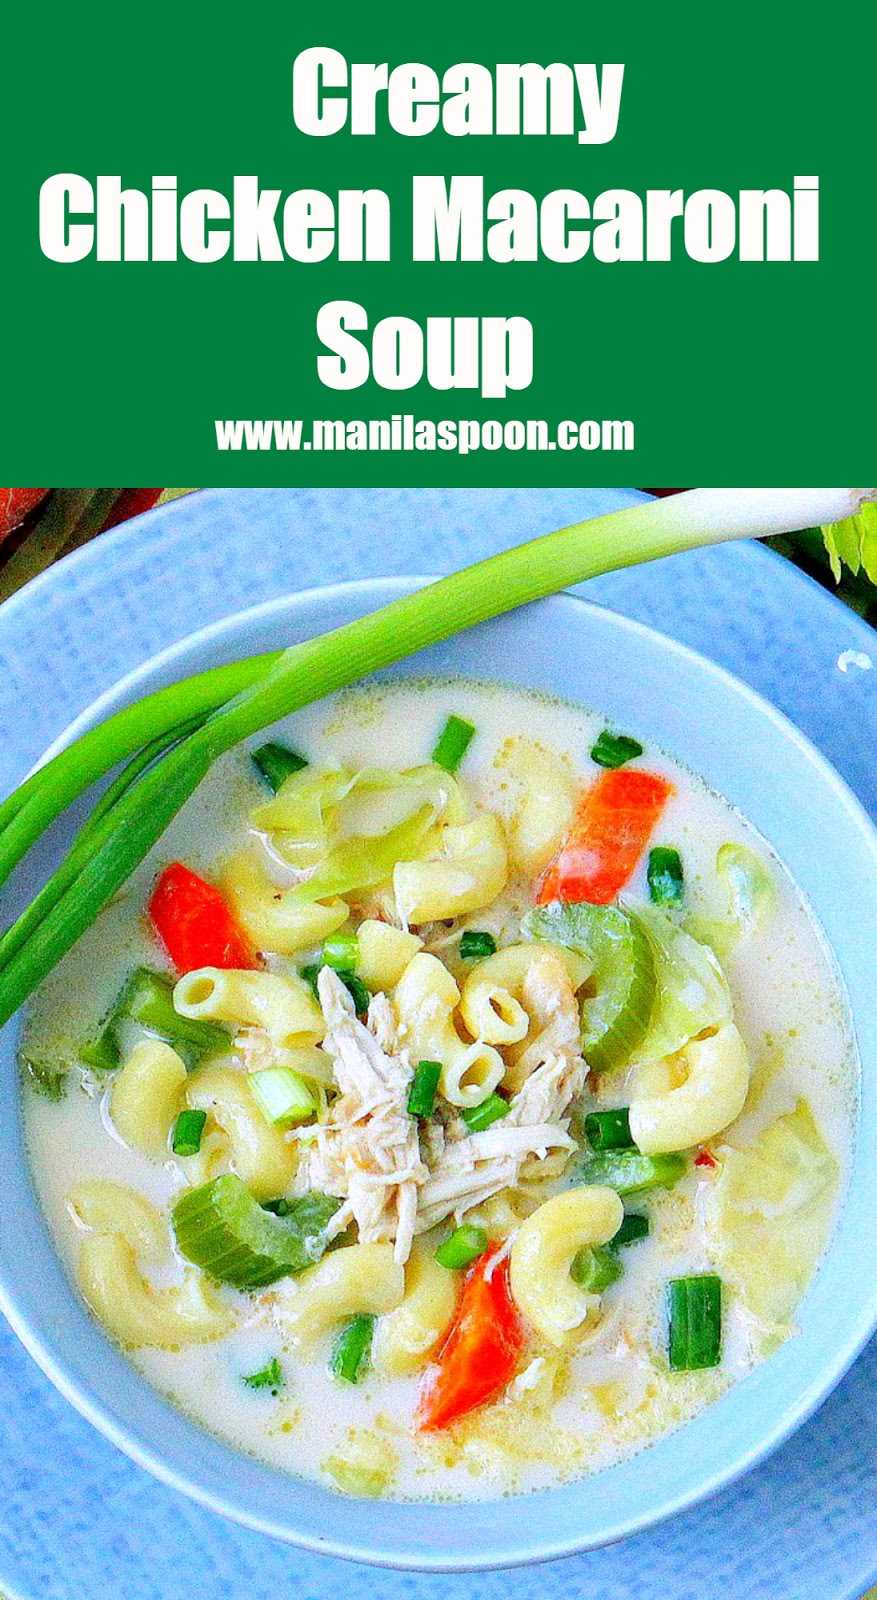 This is a creamy and flavorful Asian soup loaded with chicken, pasta and vegetables. Perfect for fall and winter!